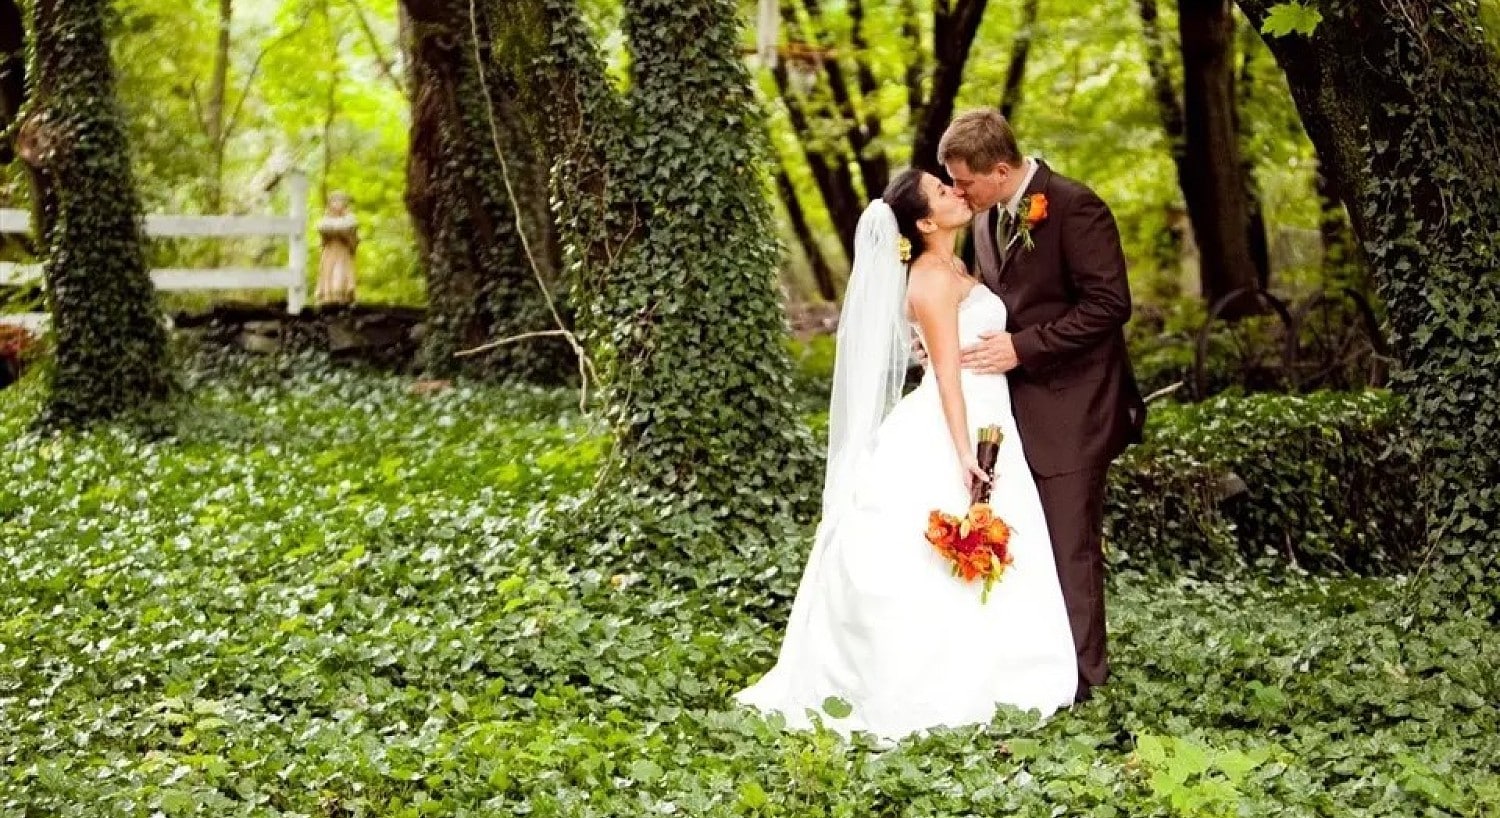 A bride and groom kissing outdoors by large trees with the ground covered in lush green leaves